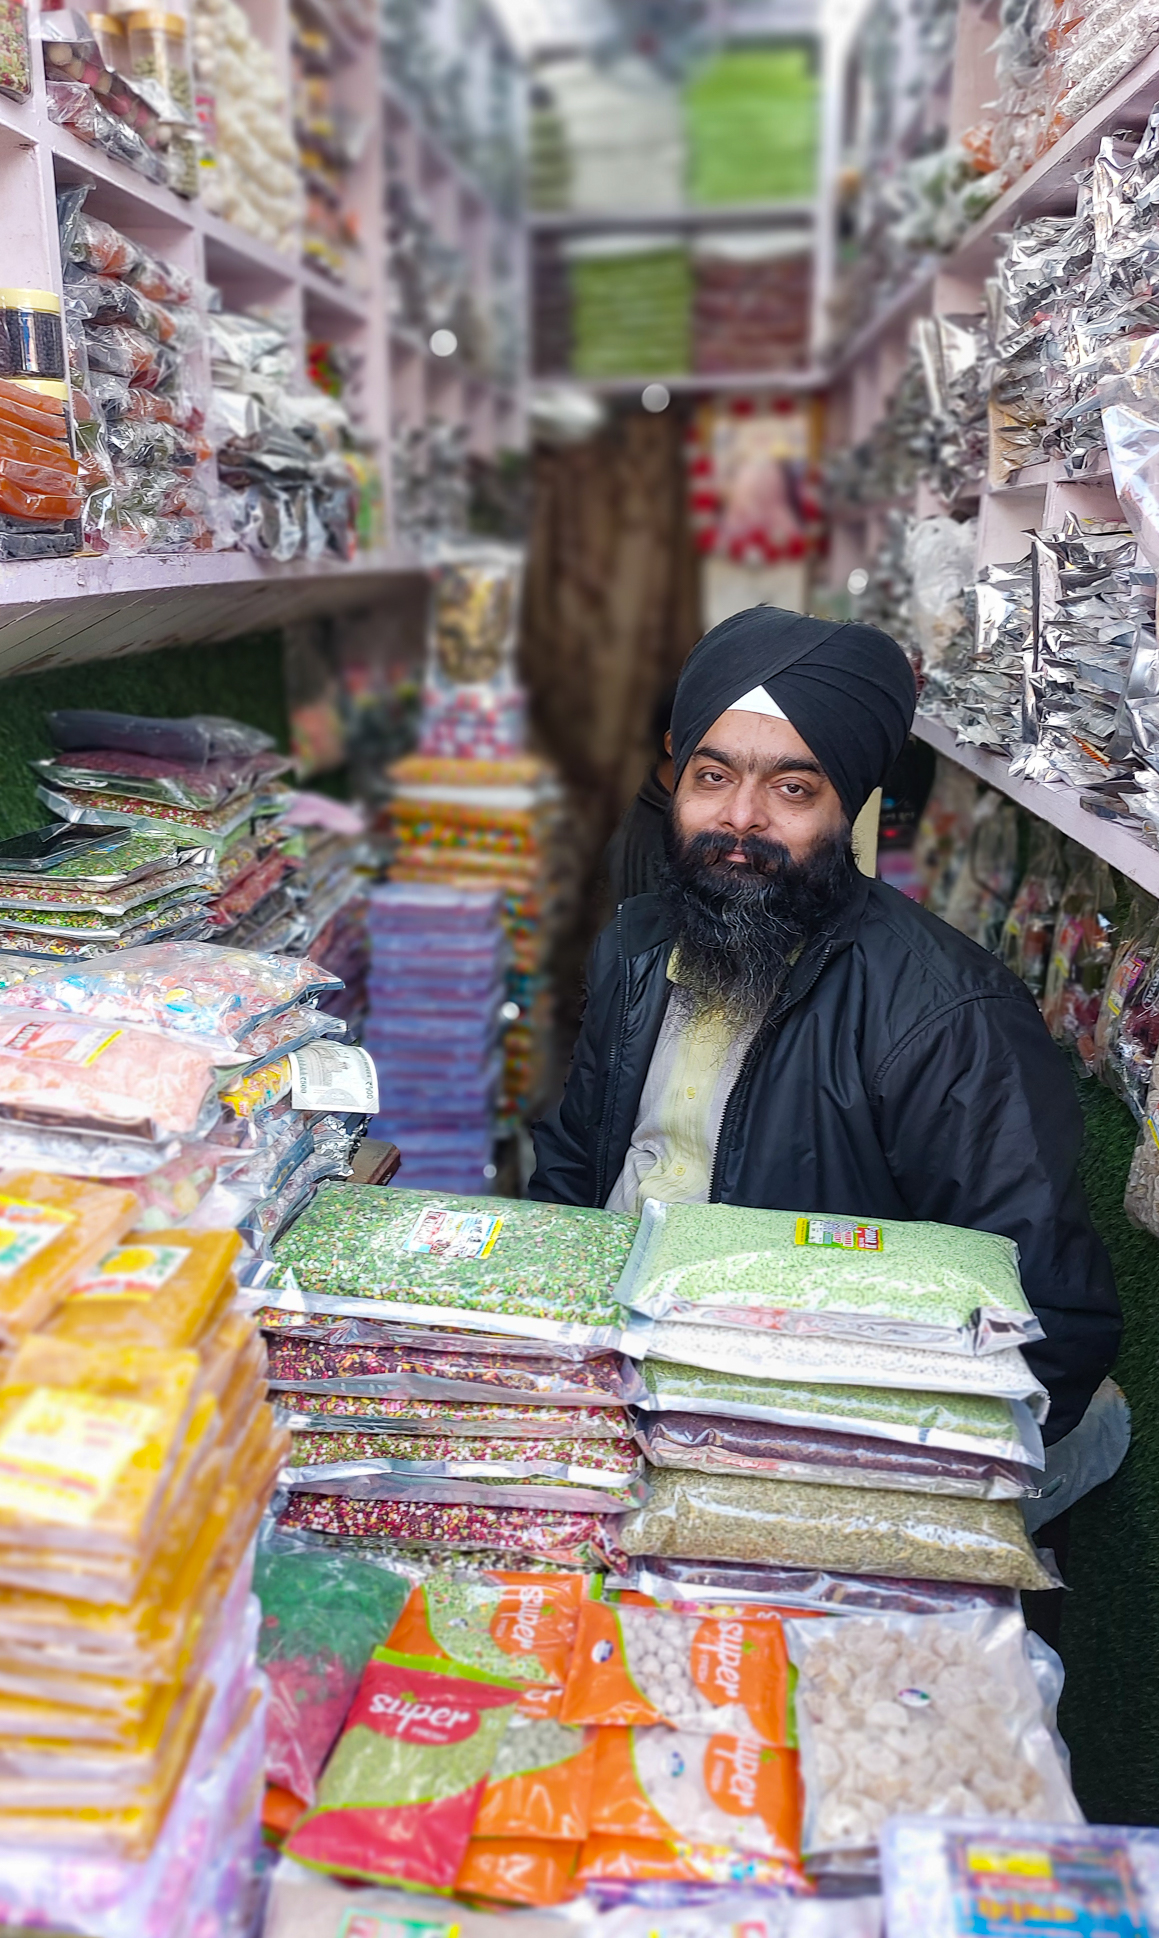 <span  class="uc_style_uc_tiles_grid_image_elementor_uc_items_attribute_title" style="color:#ffffff;">A small nibbles shop in Delhi</span>